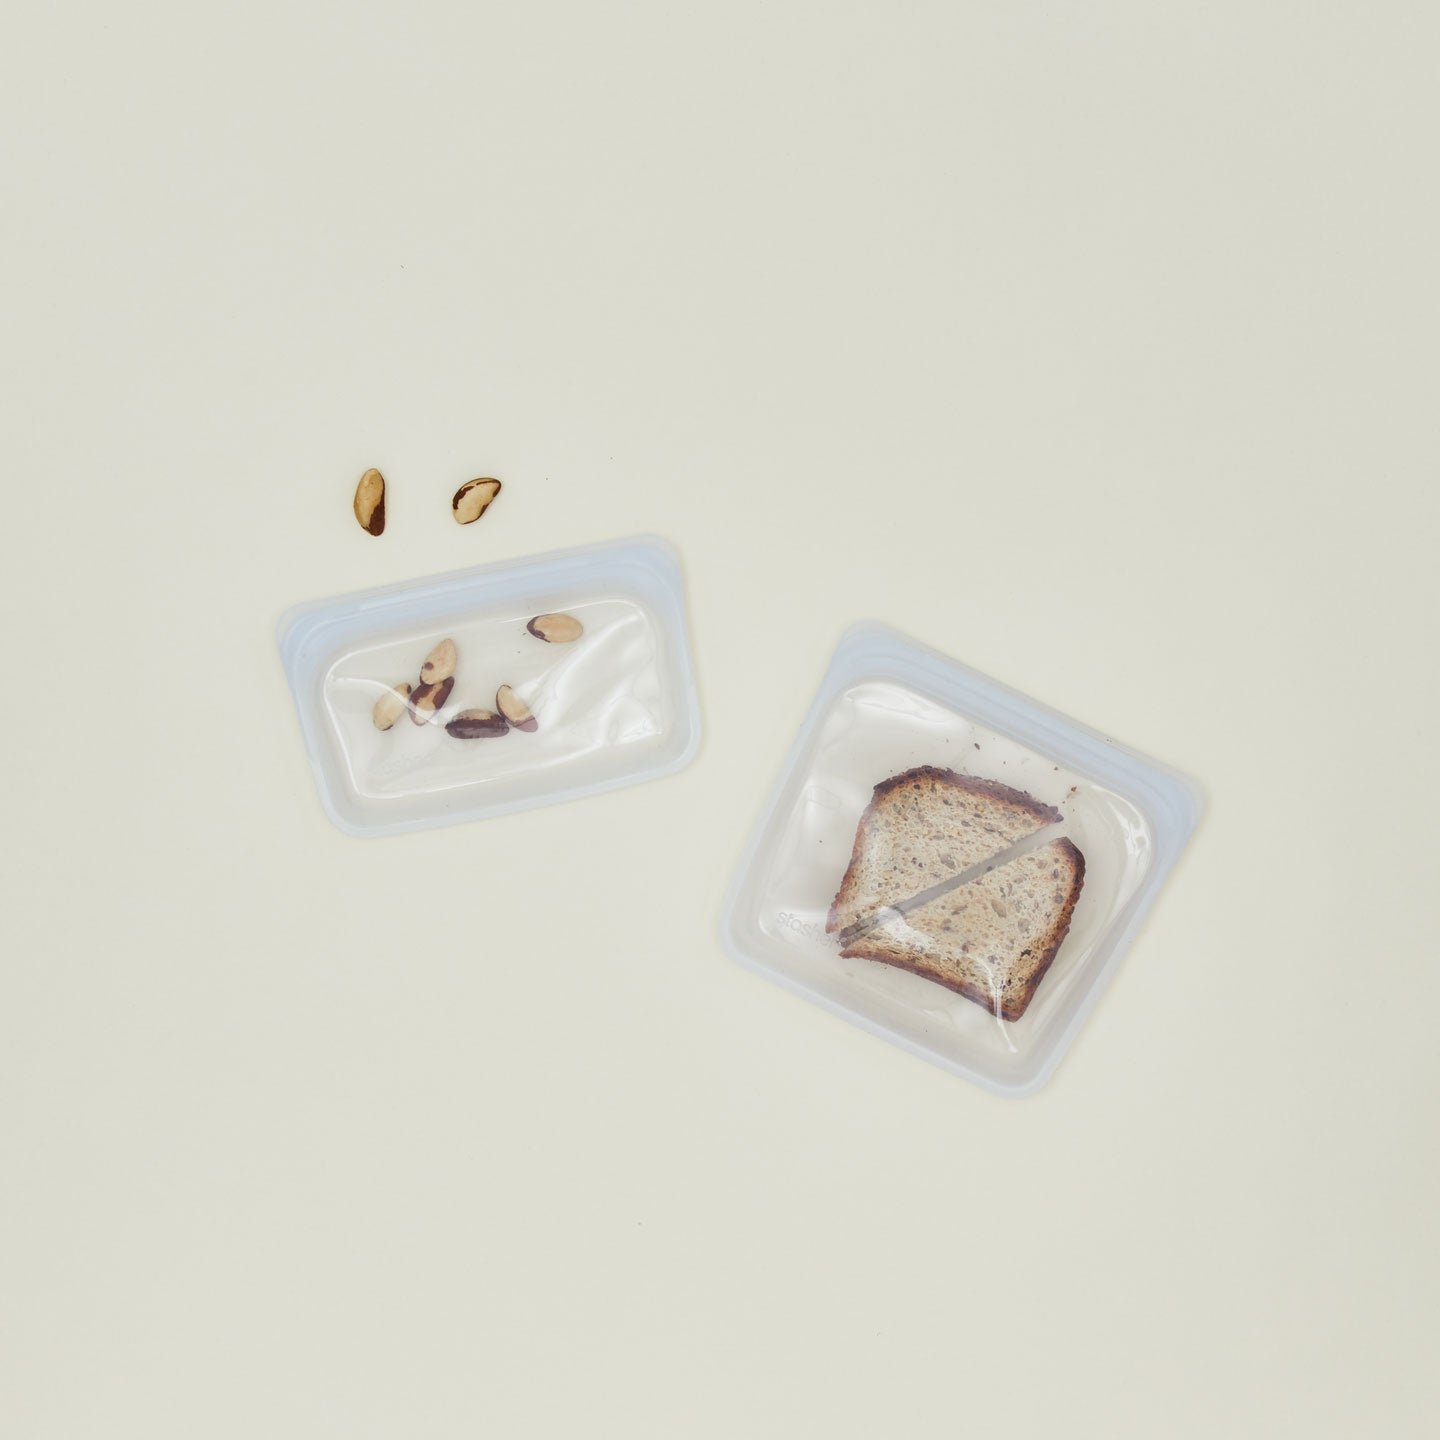 Silicone sandwich bags in two sizes with a sandwich and snacks.